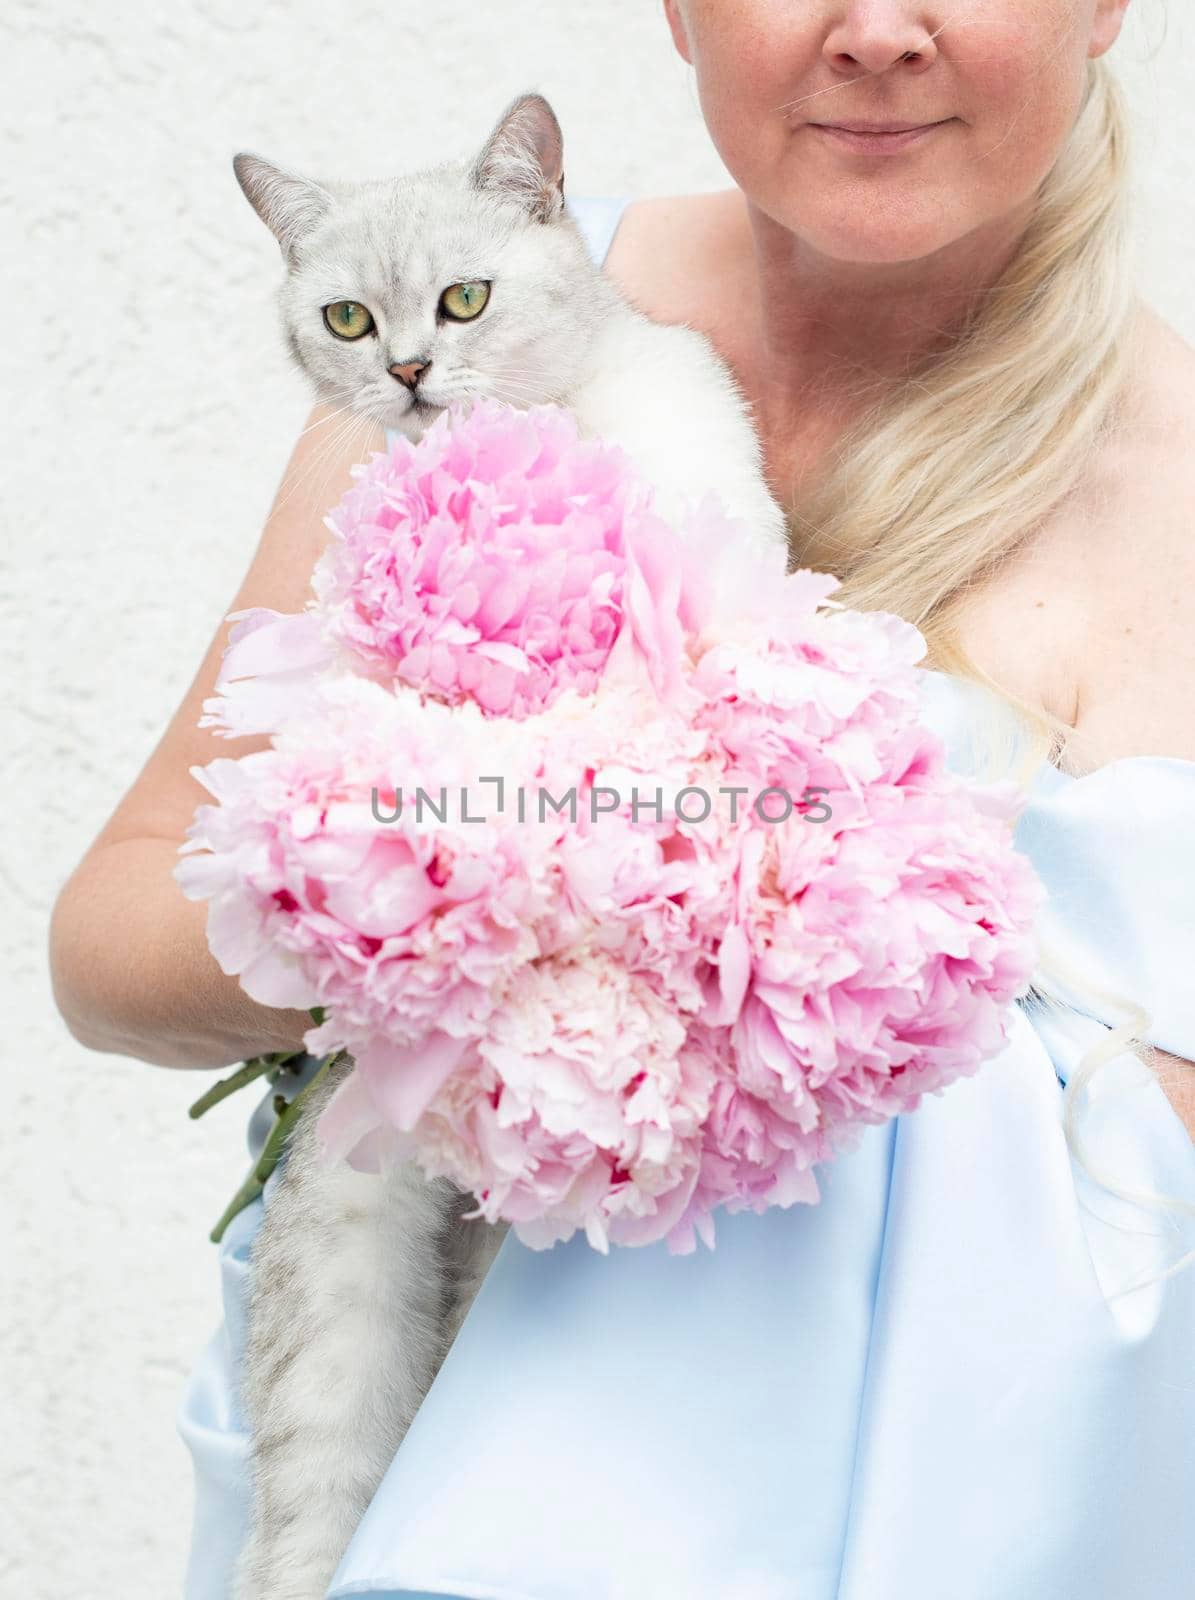 the hostess hugs a cute gray kitten with green eyes of the Scottish, blue dress by KaterinaDalemans